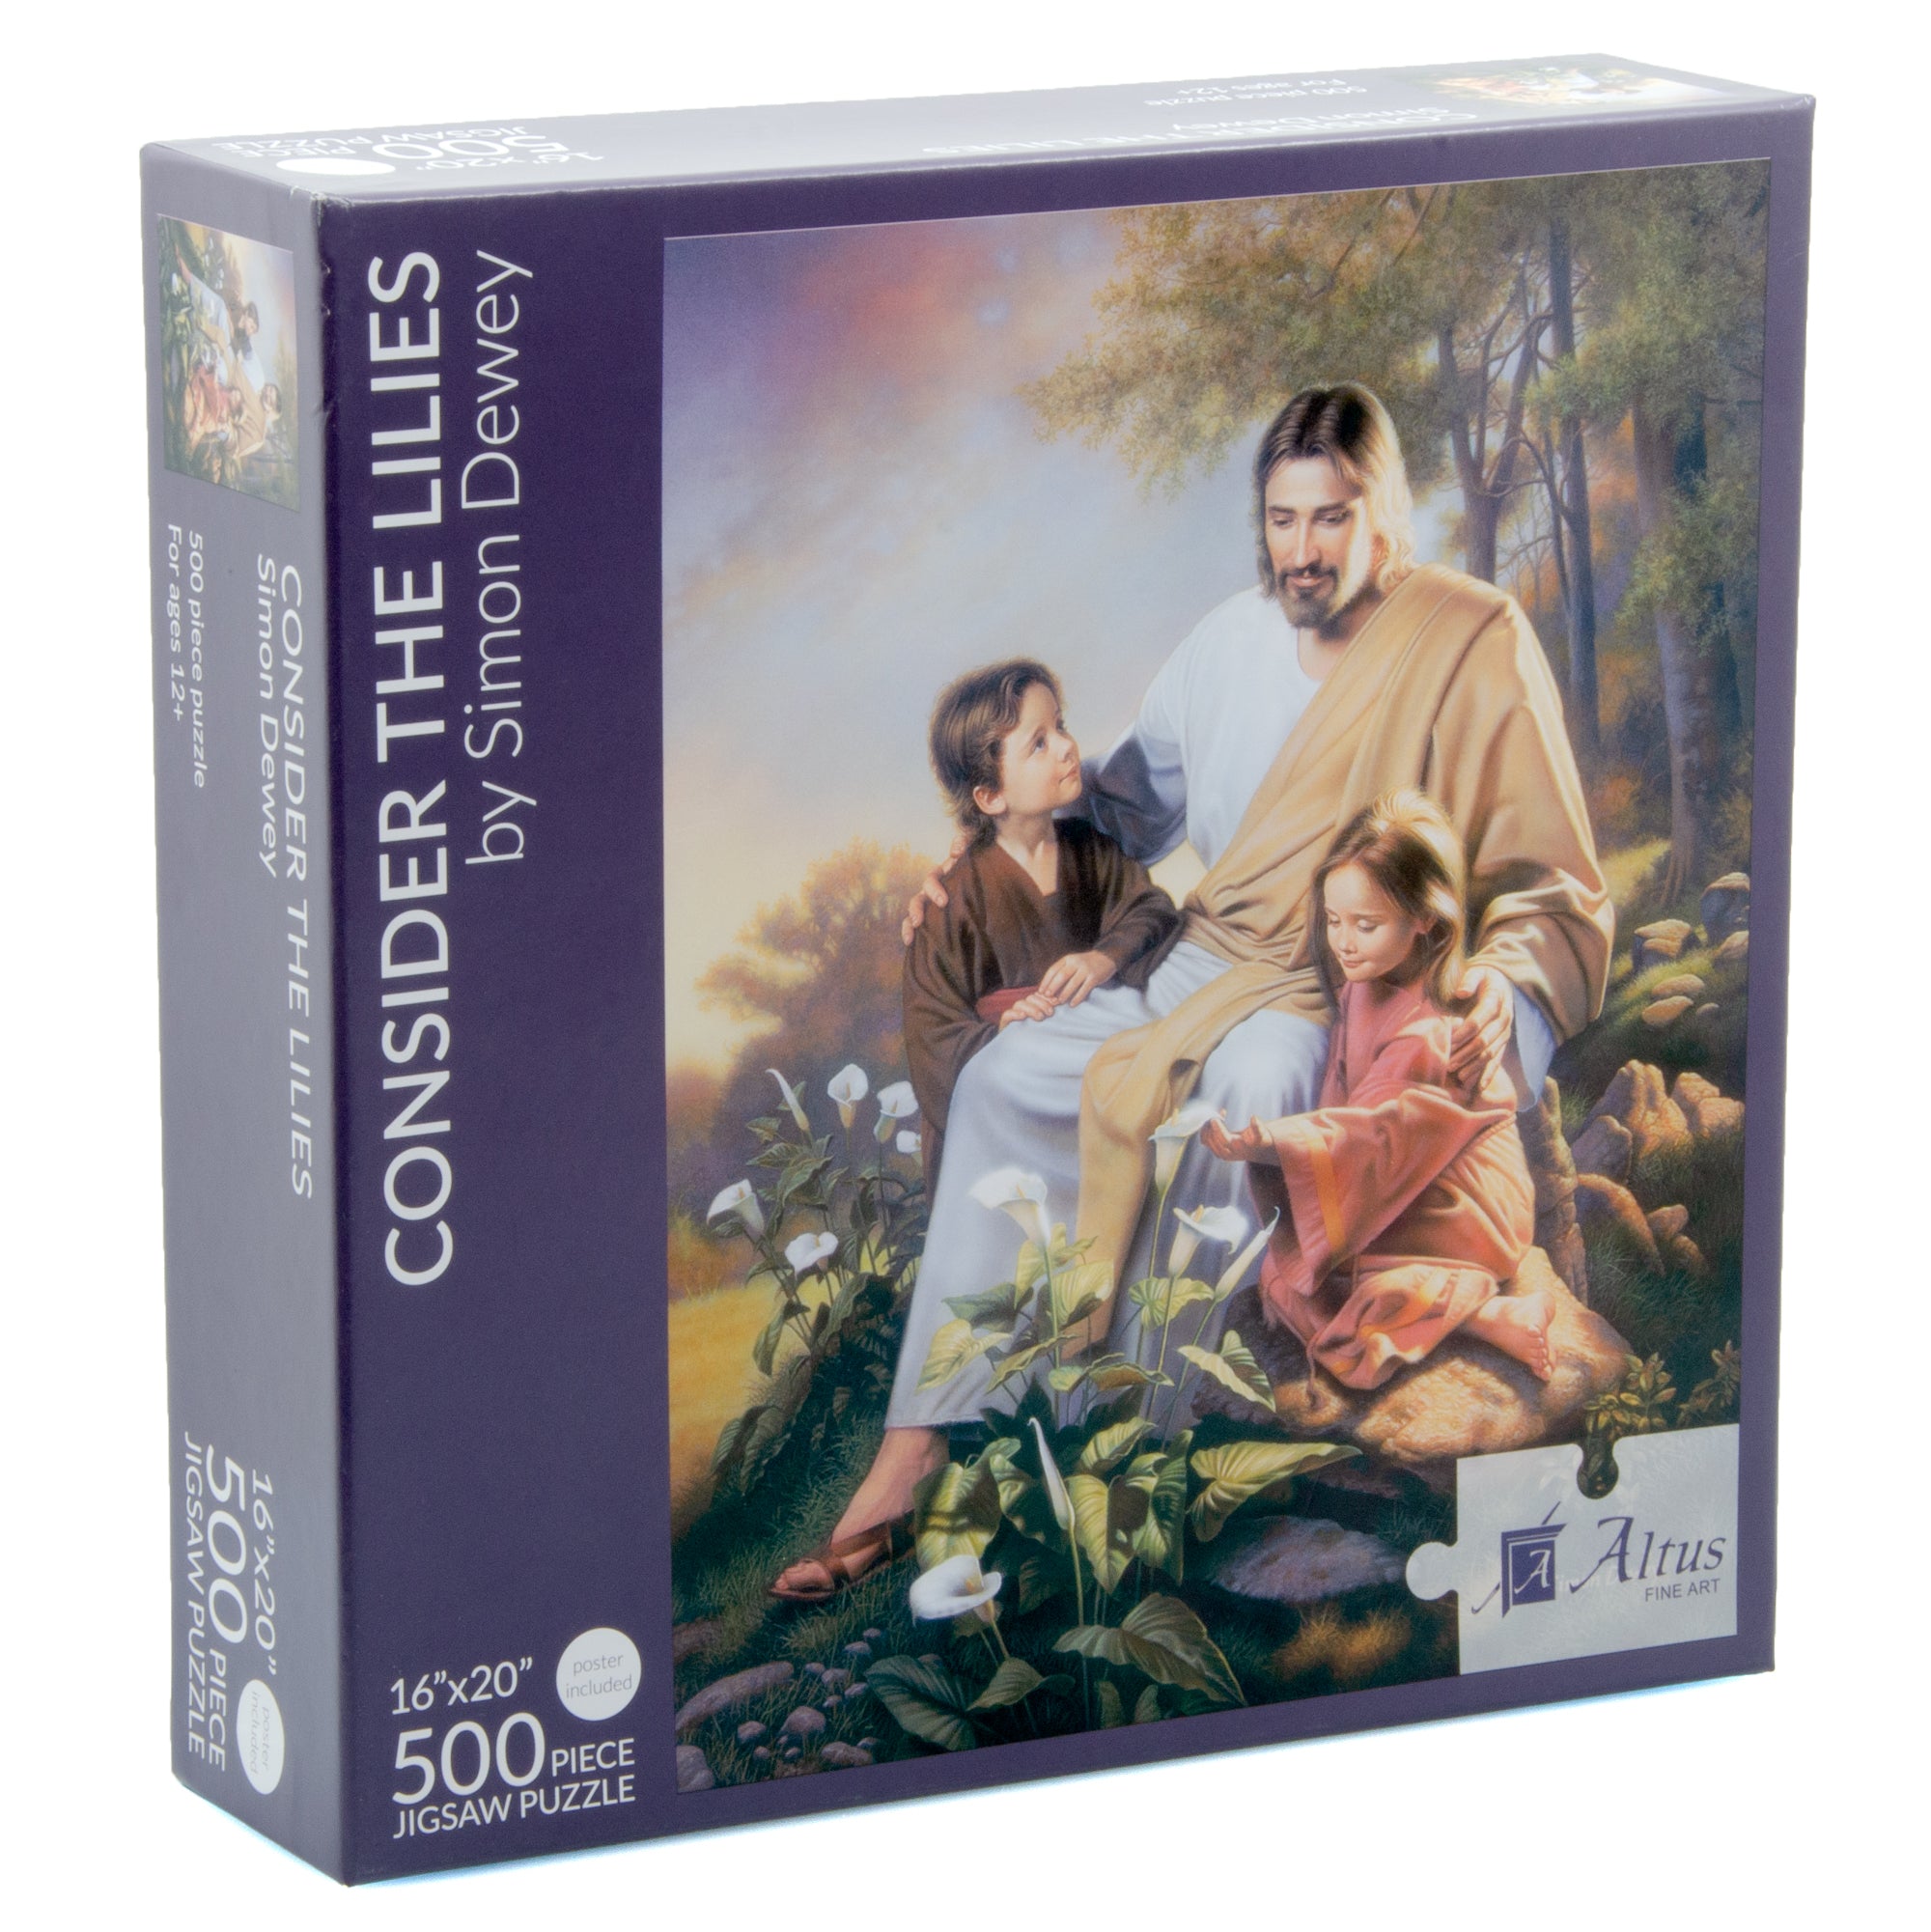 Consider the Lilies 16x20 jigsaw puzzle 500 pieces